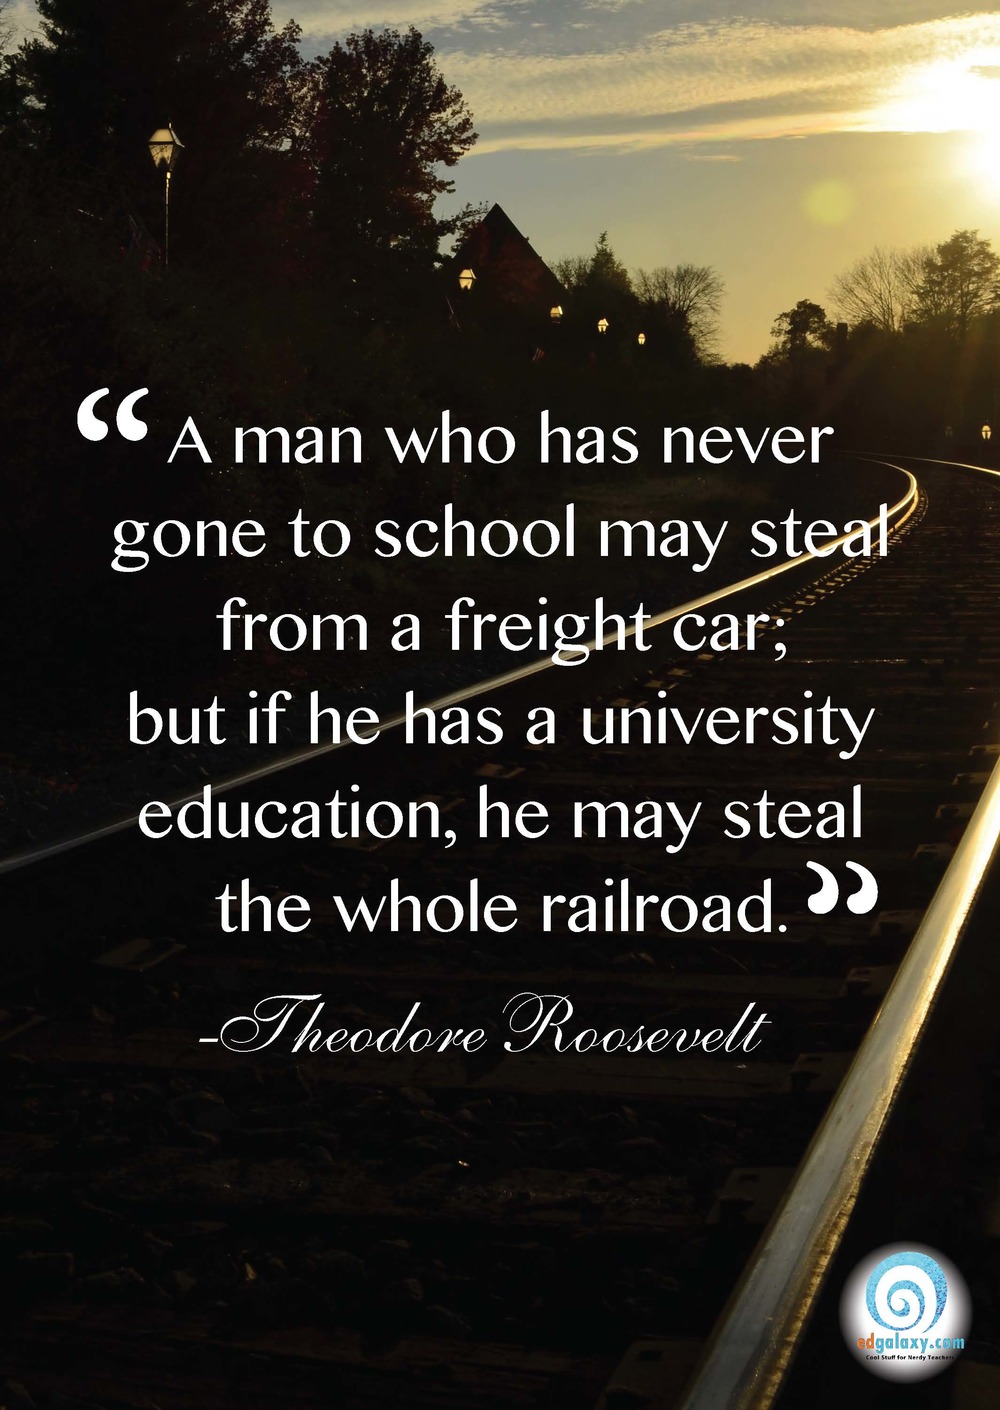 A man who has never gone to school may steal from a freight car; but if he has a university education, he may steal the whole railroad. Theodore Roosevelt